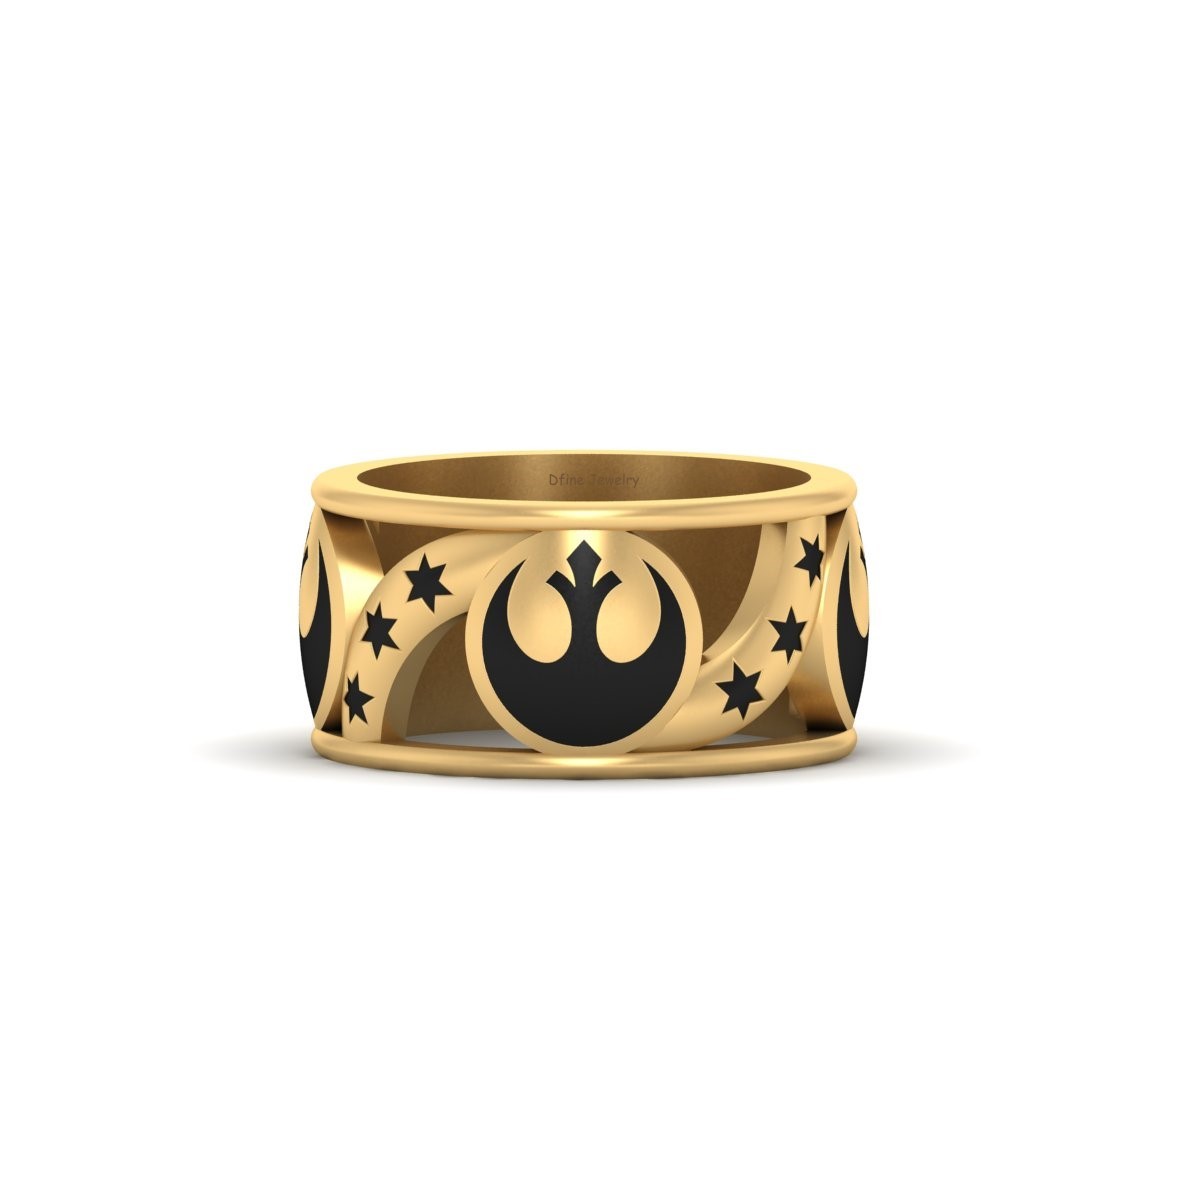 Yellow Fn 925 Sterling Silver Star Wars Band For Men Star Wars Wedding Band Mens